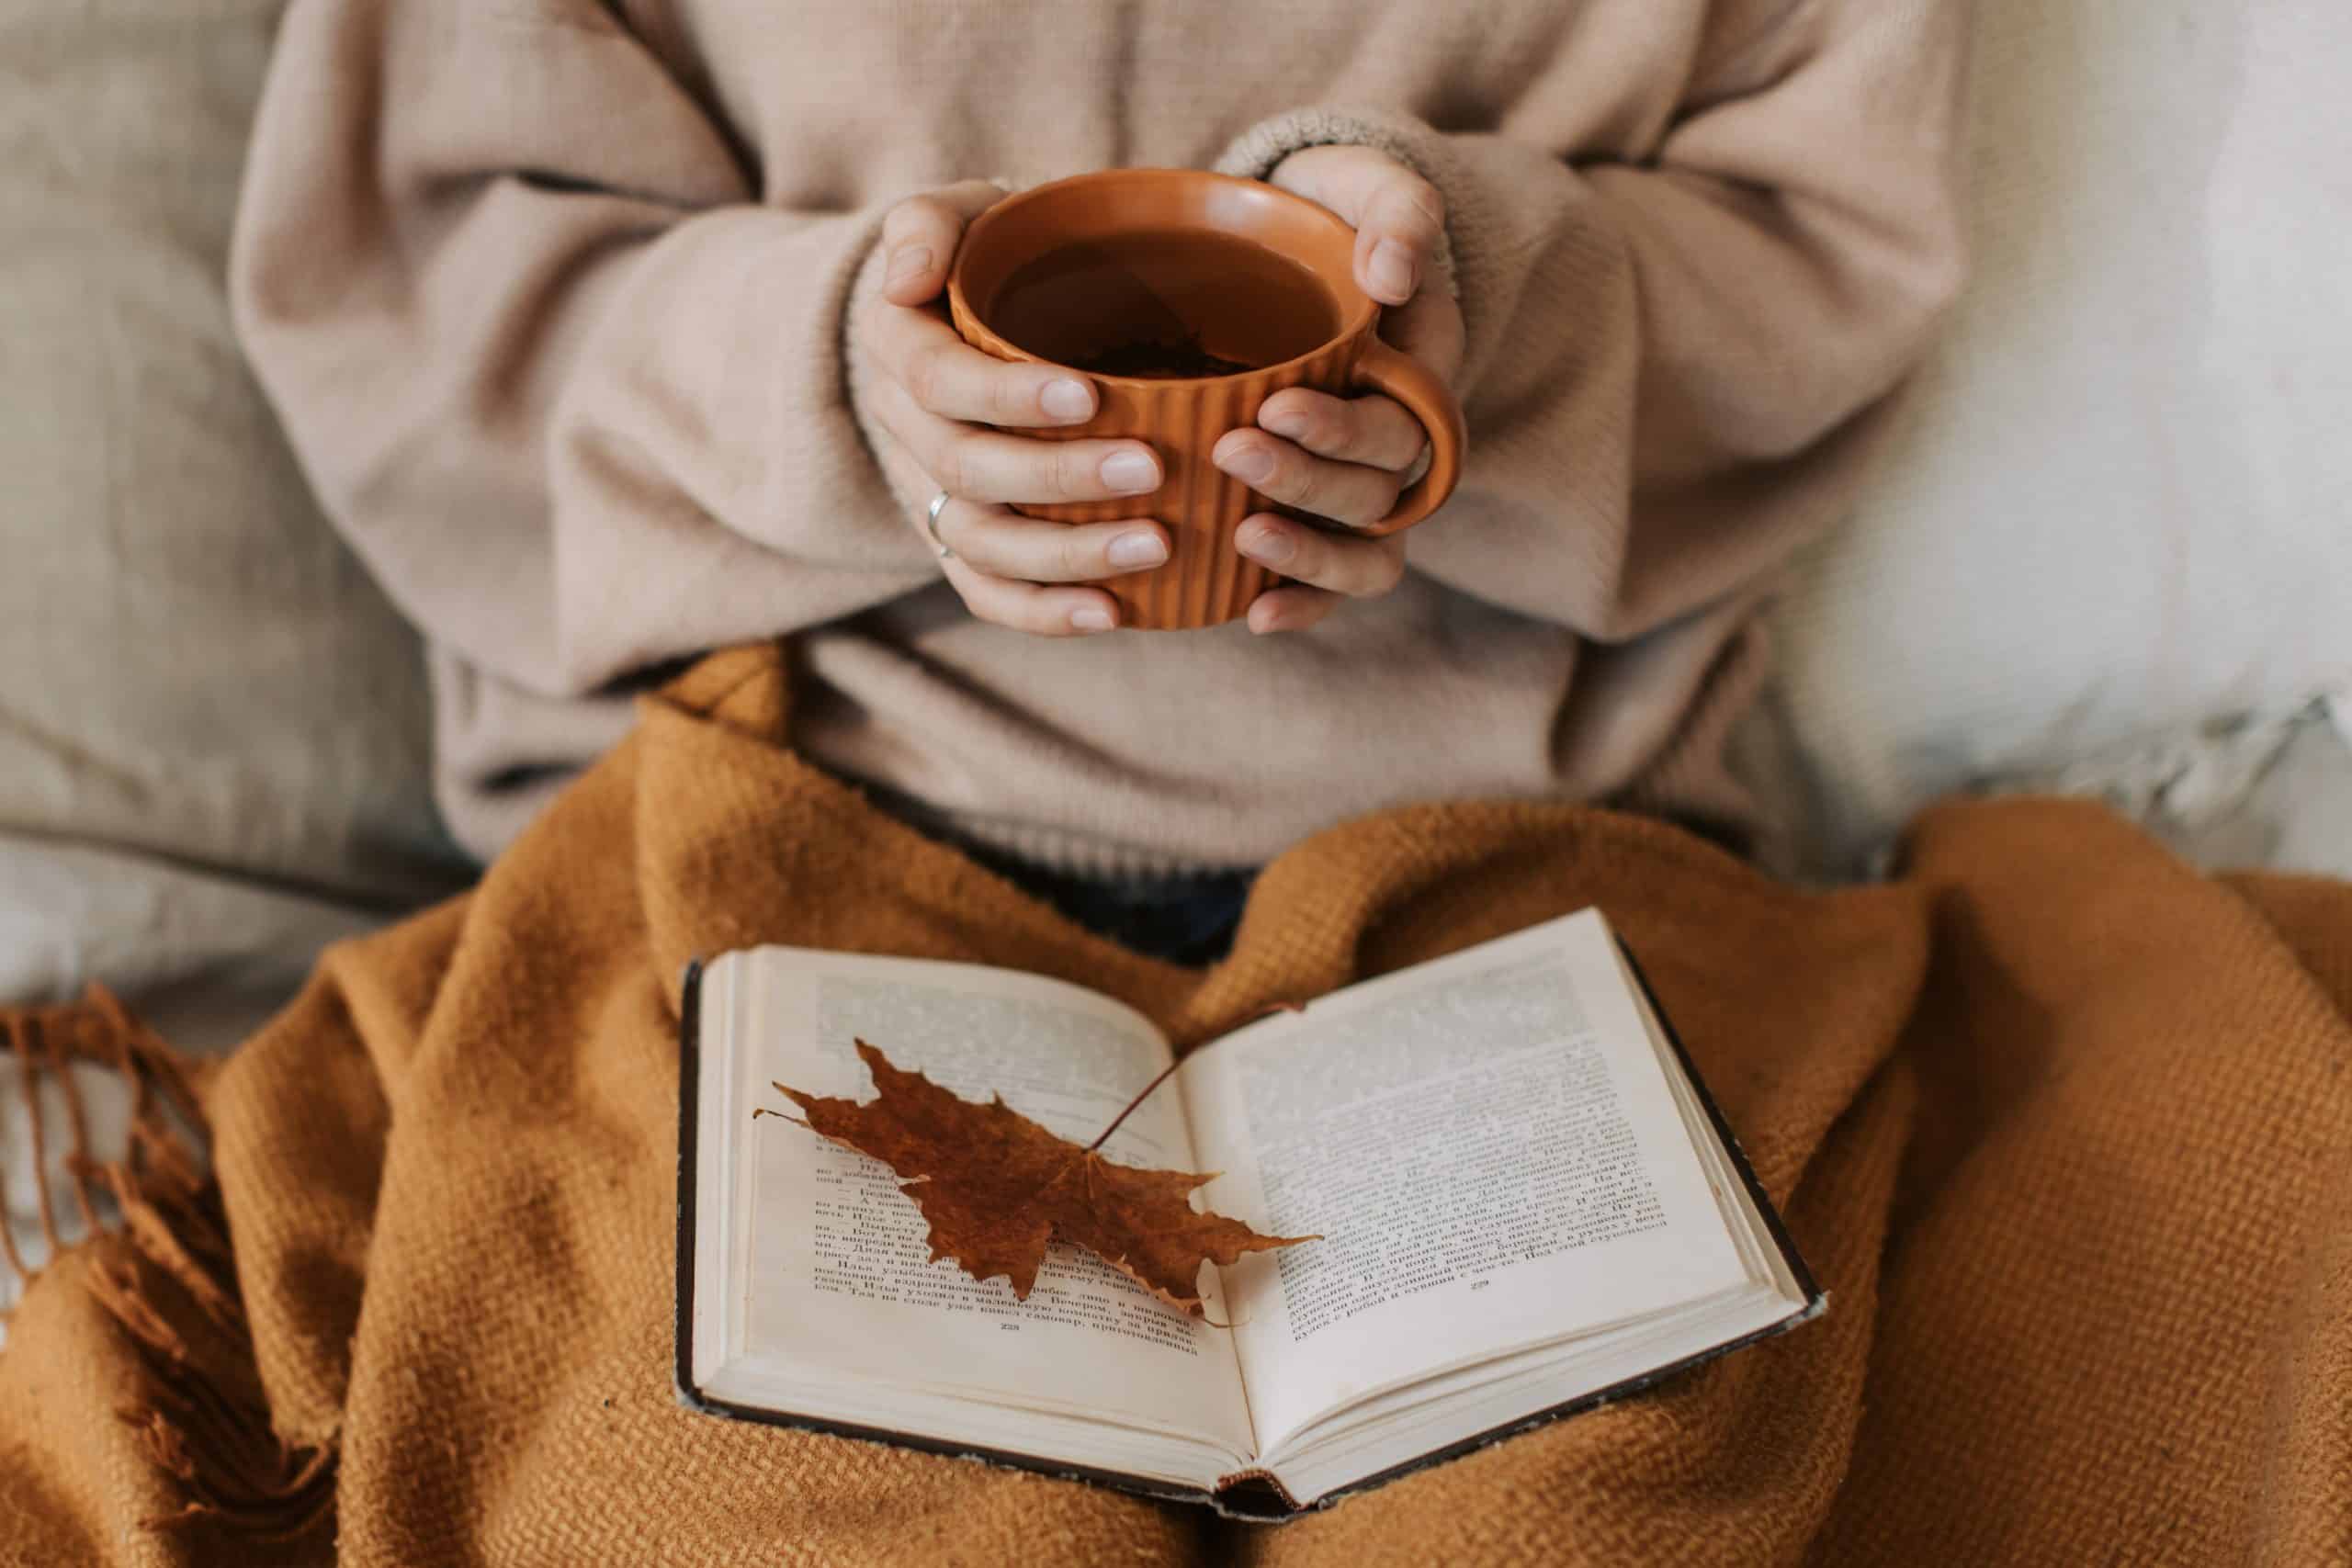 Woman holding a coffee up with a blanket and open book on lap